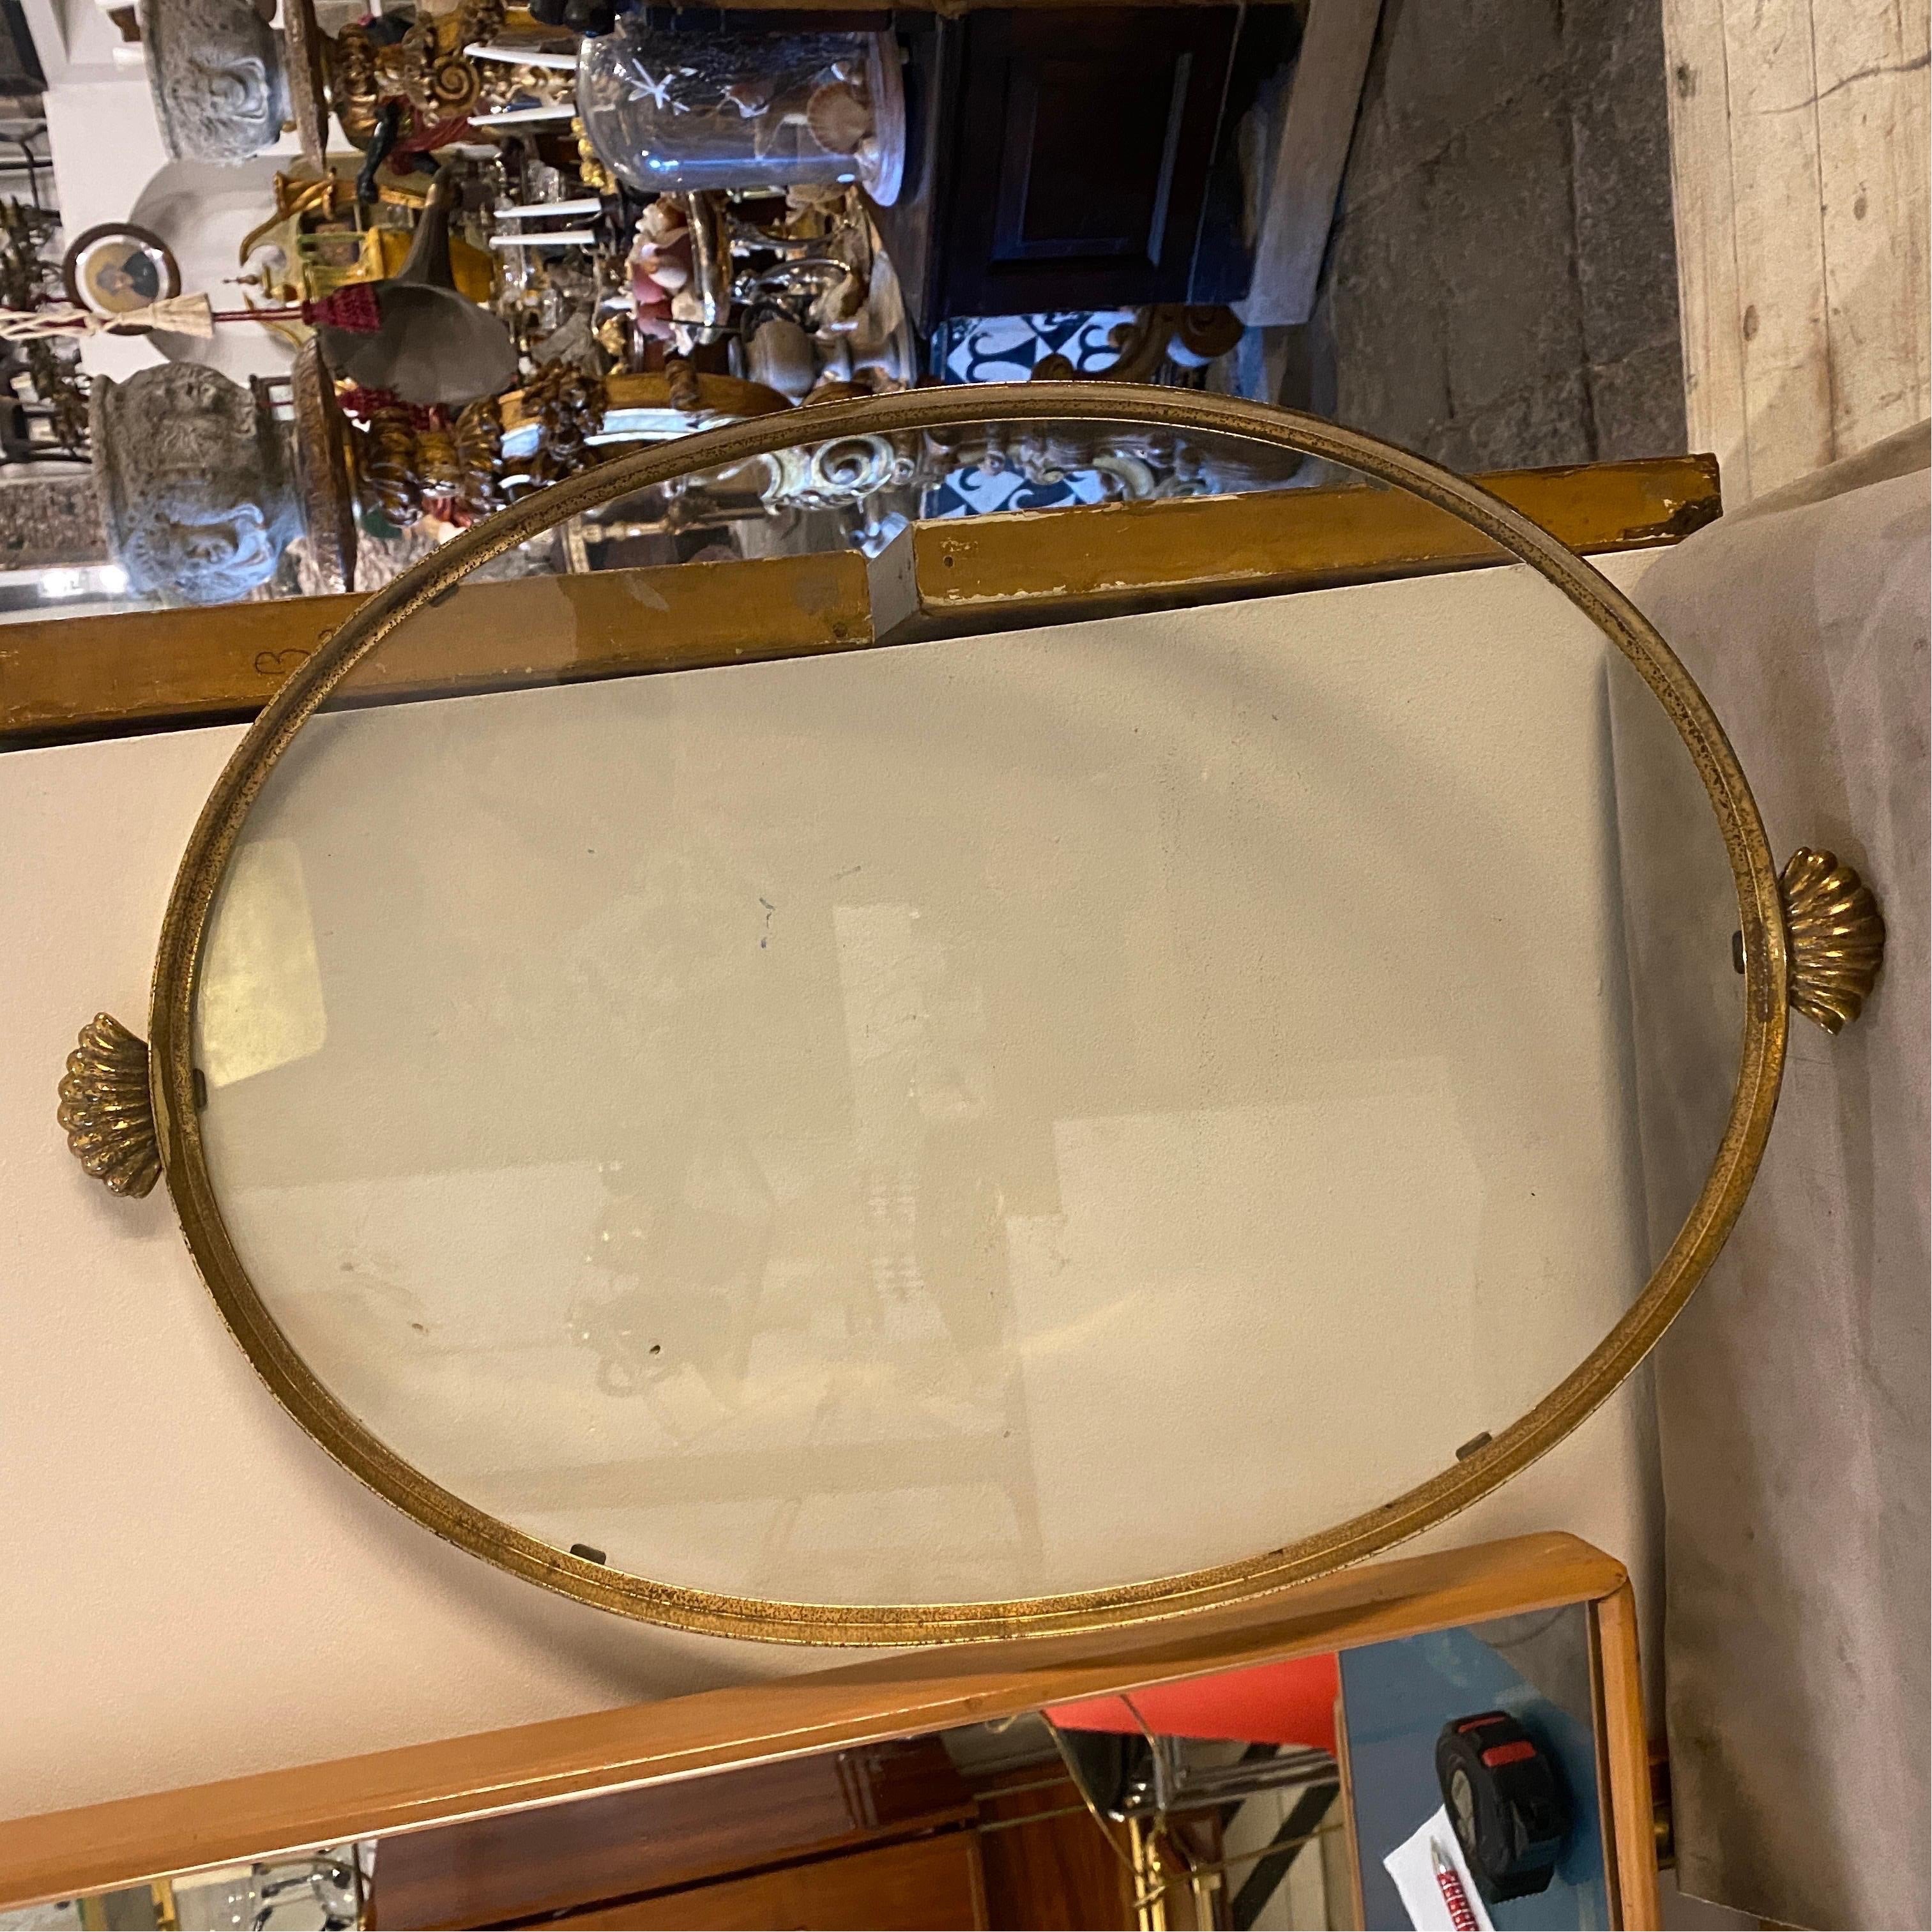 An hand-crafted solid brass and glass serving tray designed and manufactured in Italy in the Fifties. Brass in original patina gives it a superb vintage look .A 1950s mid-century modern oval tray made from brass and glass would be a stunning piece